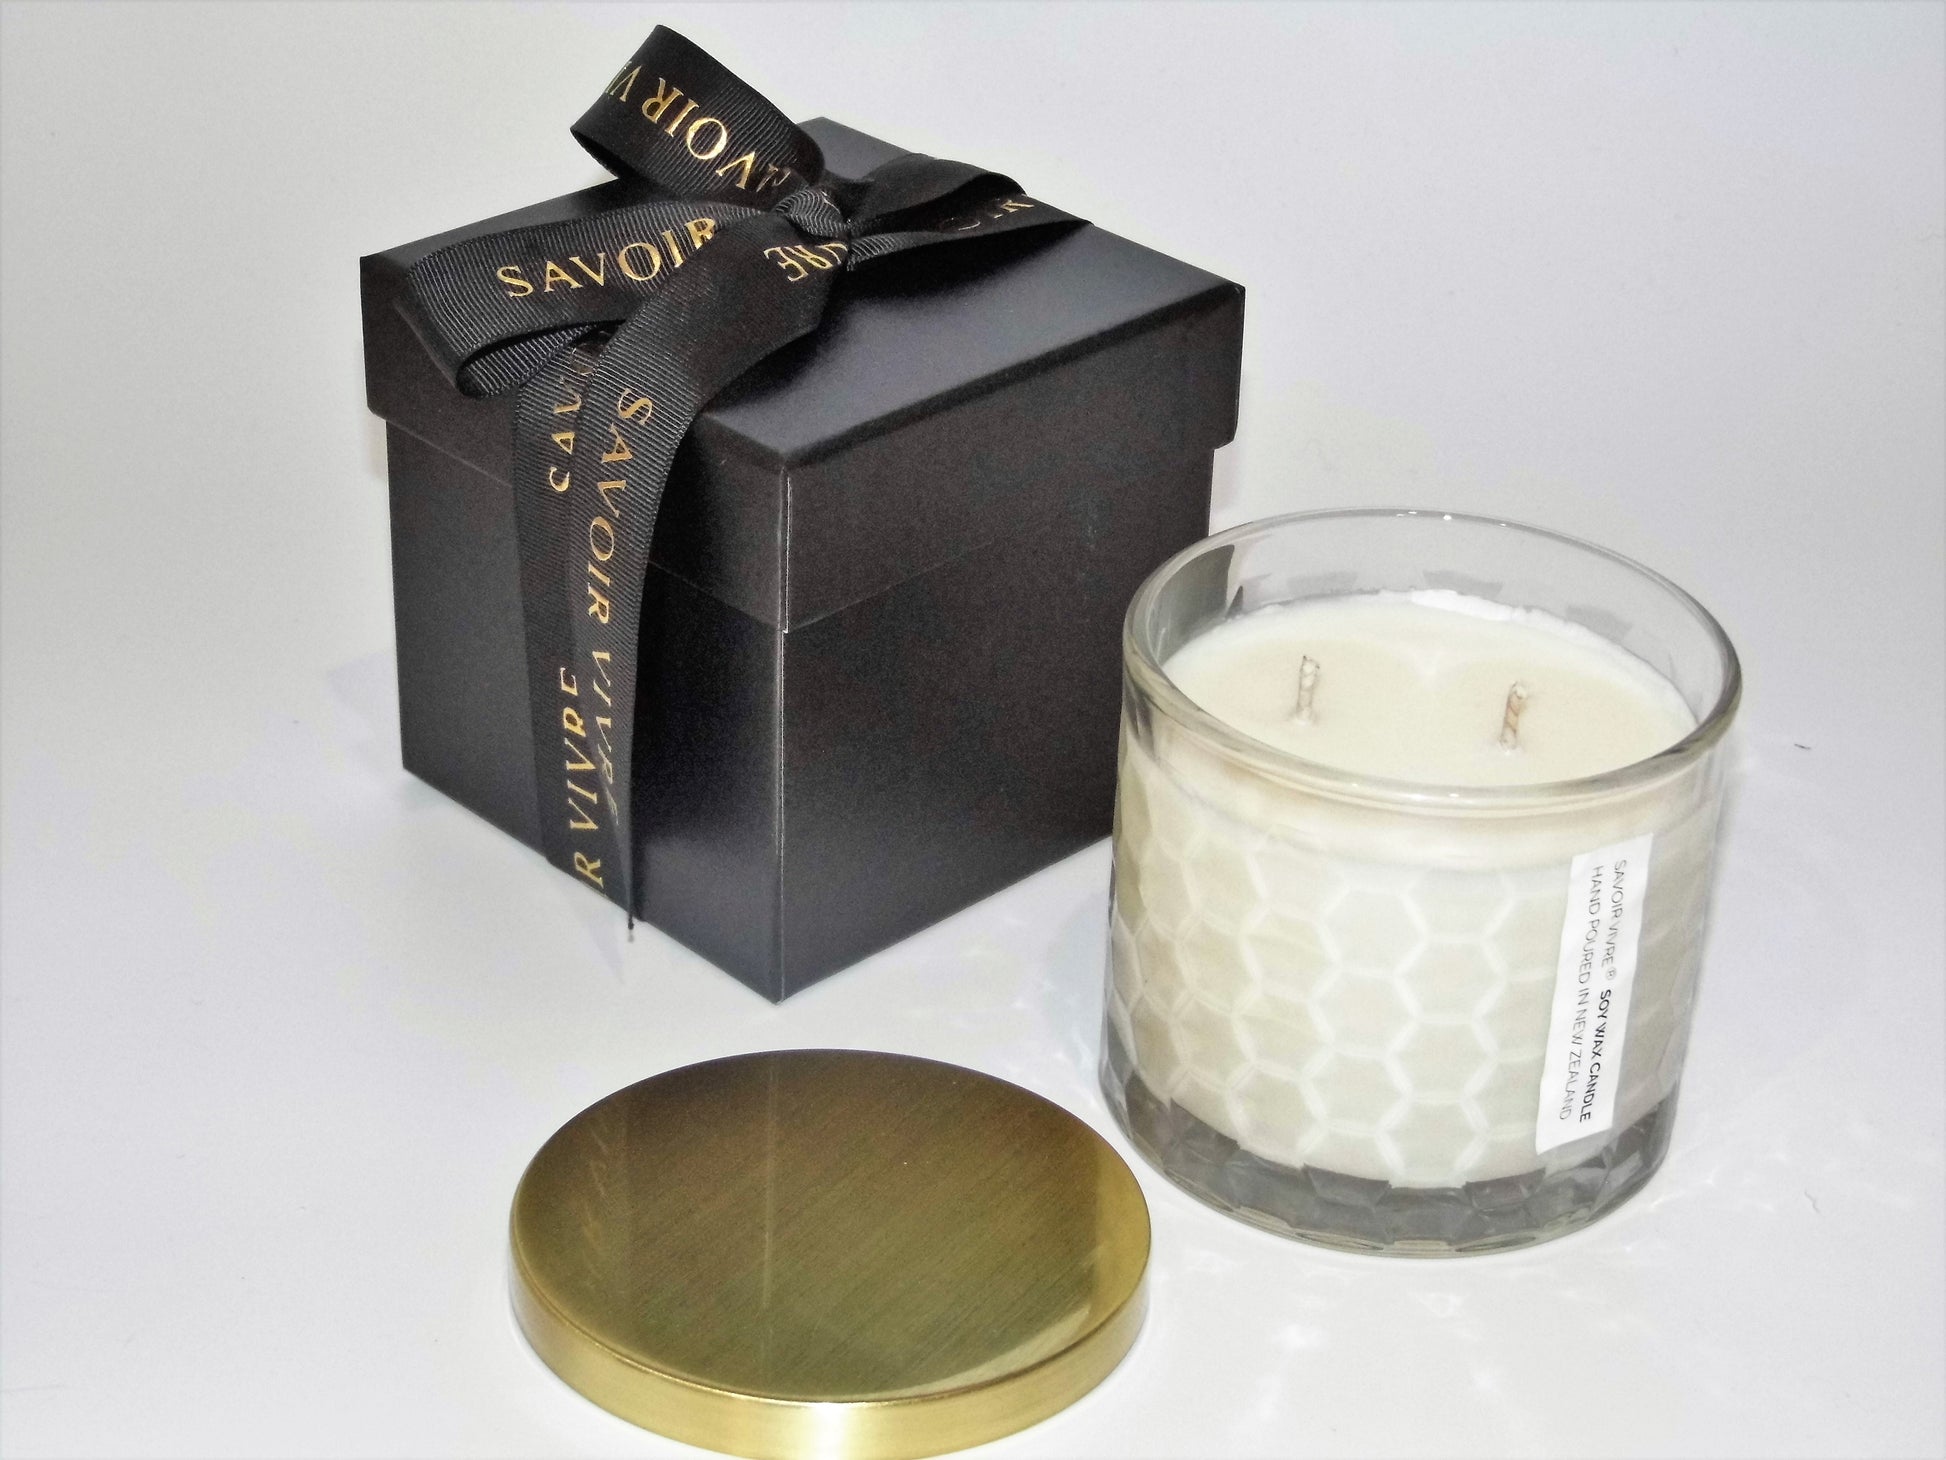 Savoir Vivre Gift Boxed Brown Sugar and Fig Soy Candle 390g NZ